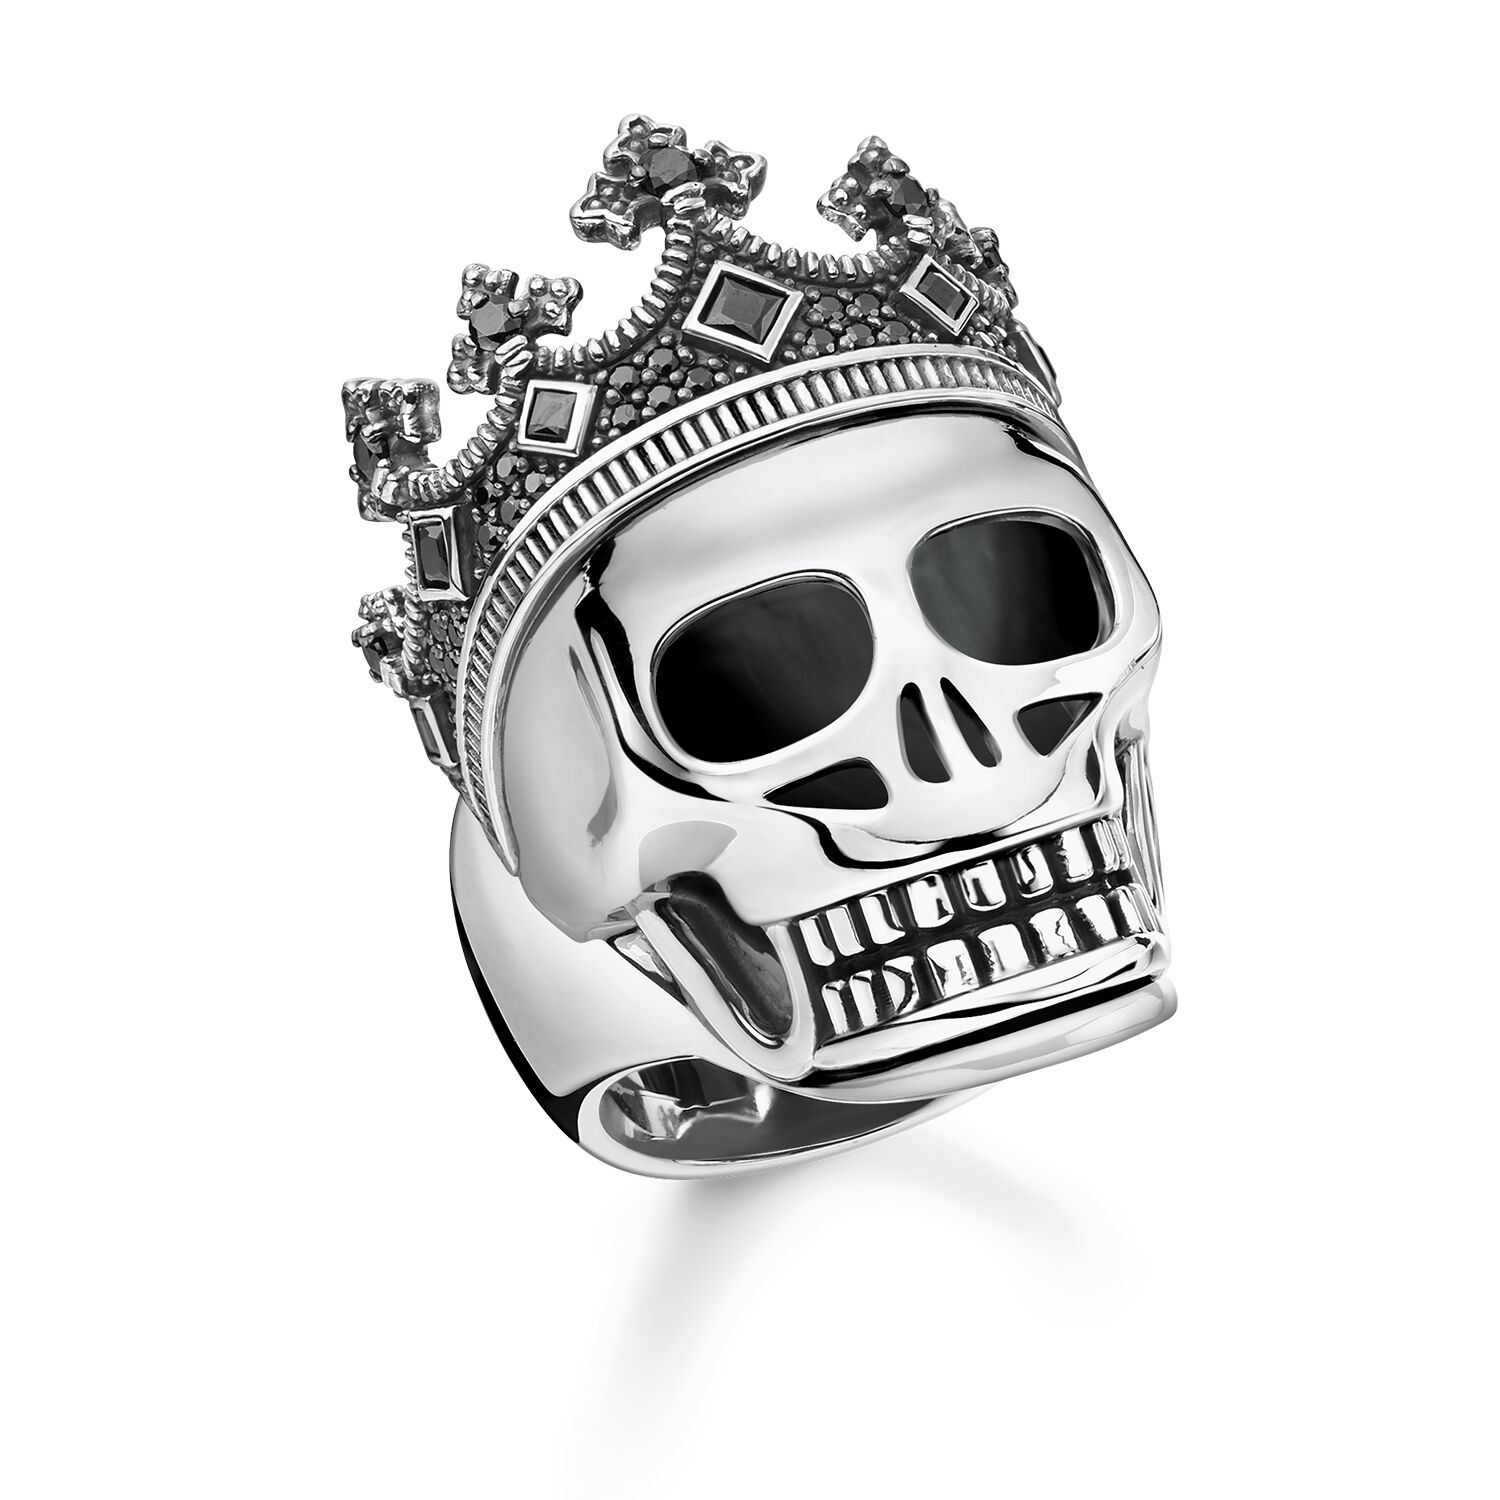 Wholesale Custom made ring OEM/ODM Jewelry is presented in a rock’n’roll skull design factory